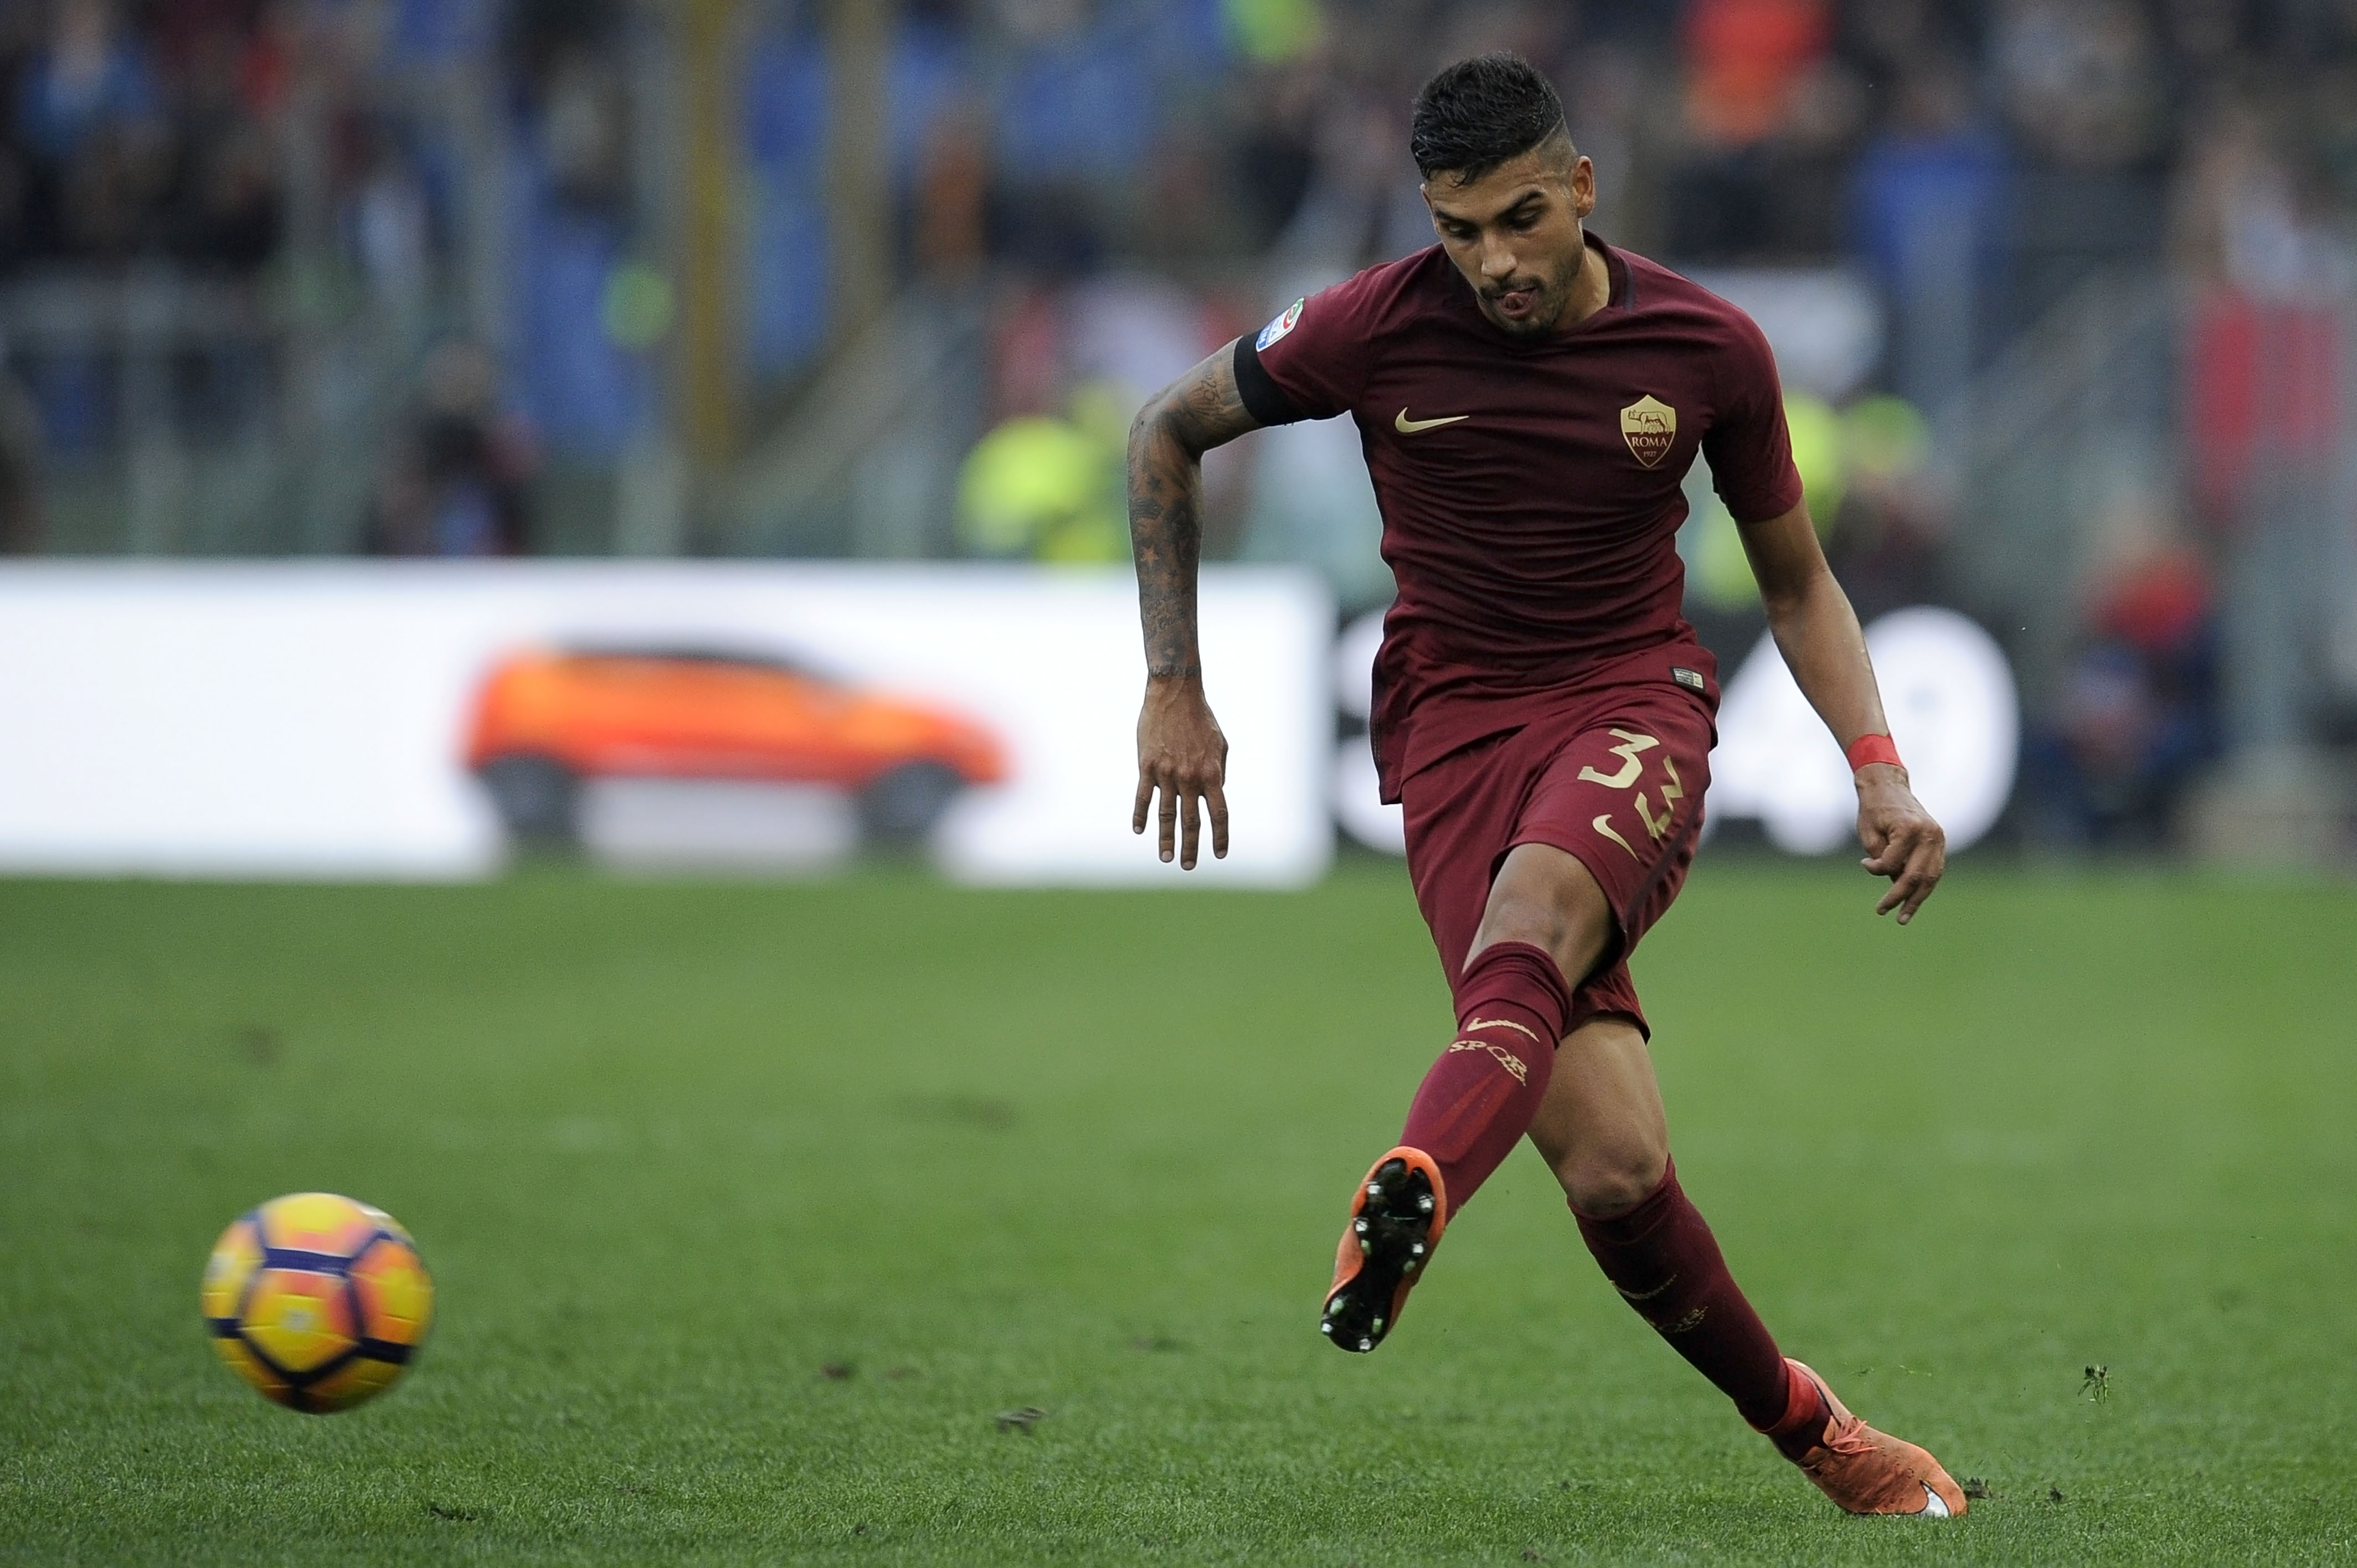 ROME, ROMA - DECEMBER 04:  Emerson Palmieri of AS Roma in action during the Serie A match between SS Lazio and AS Roma at Stadio Olimpico on December 4, 2016 in Rome, Italy.  (Photo by Marco Rosi/Getty Images)